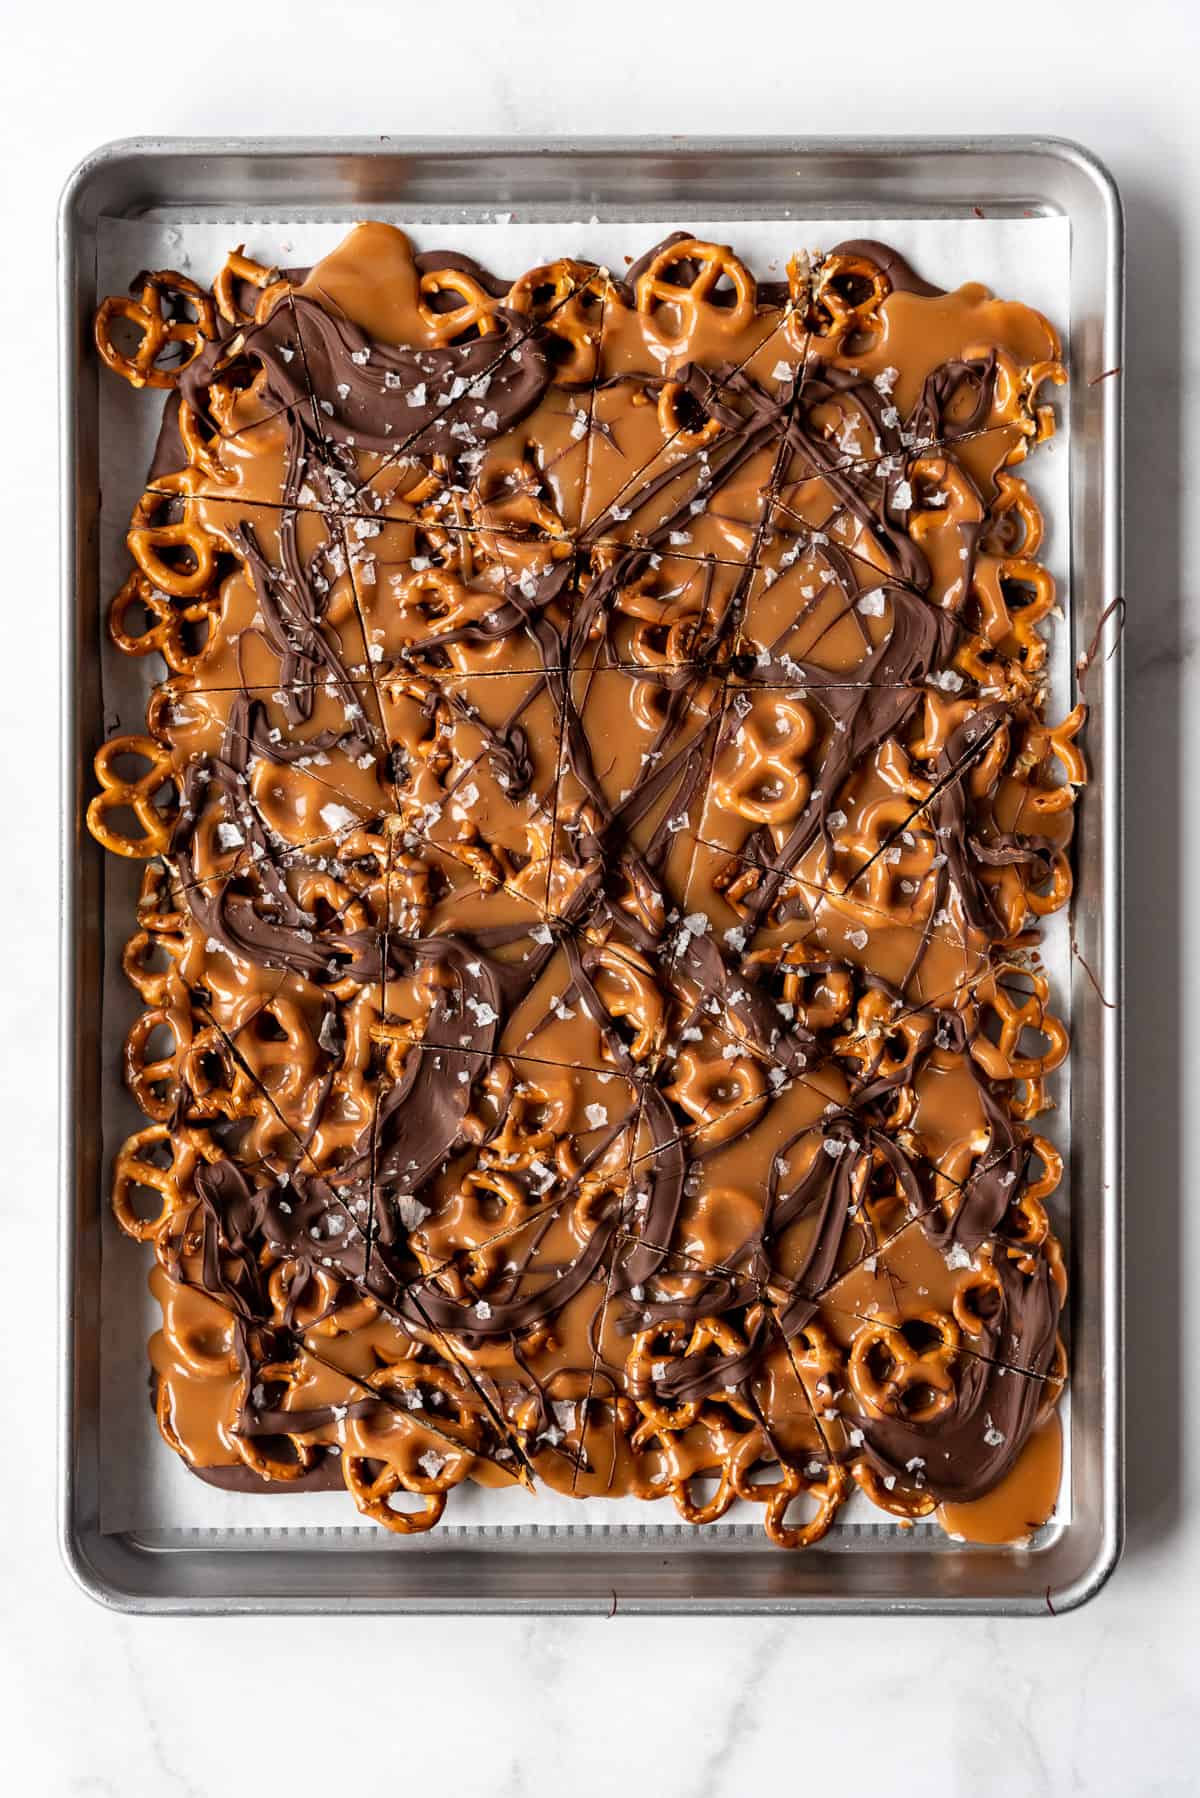 A baking sheet with set up homemade pretzel caramel chocolate candy on it.